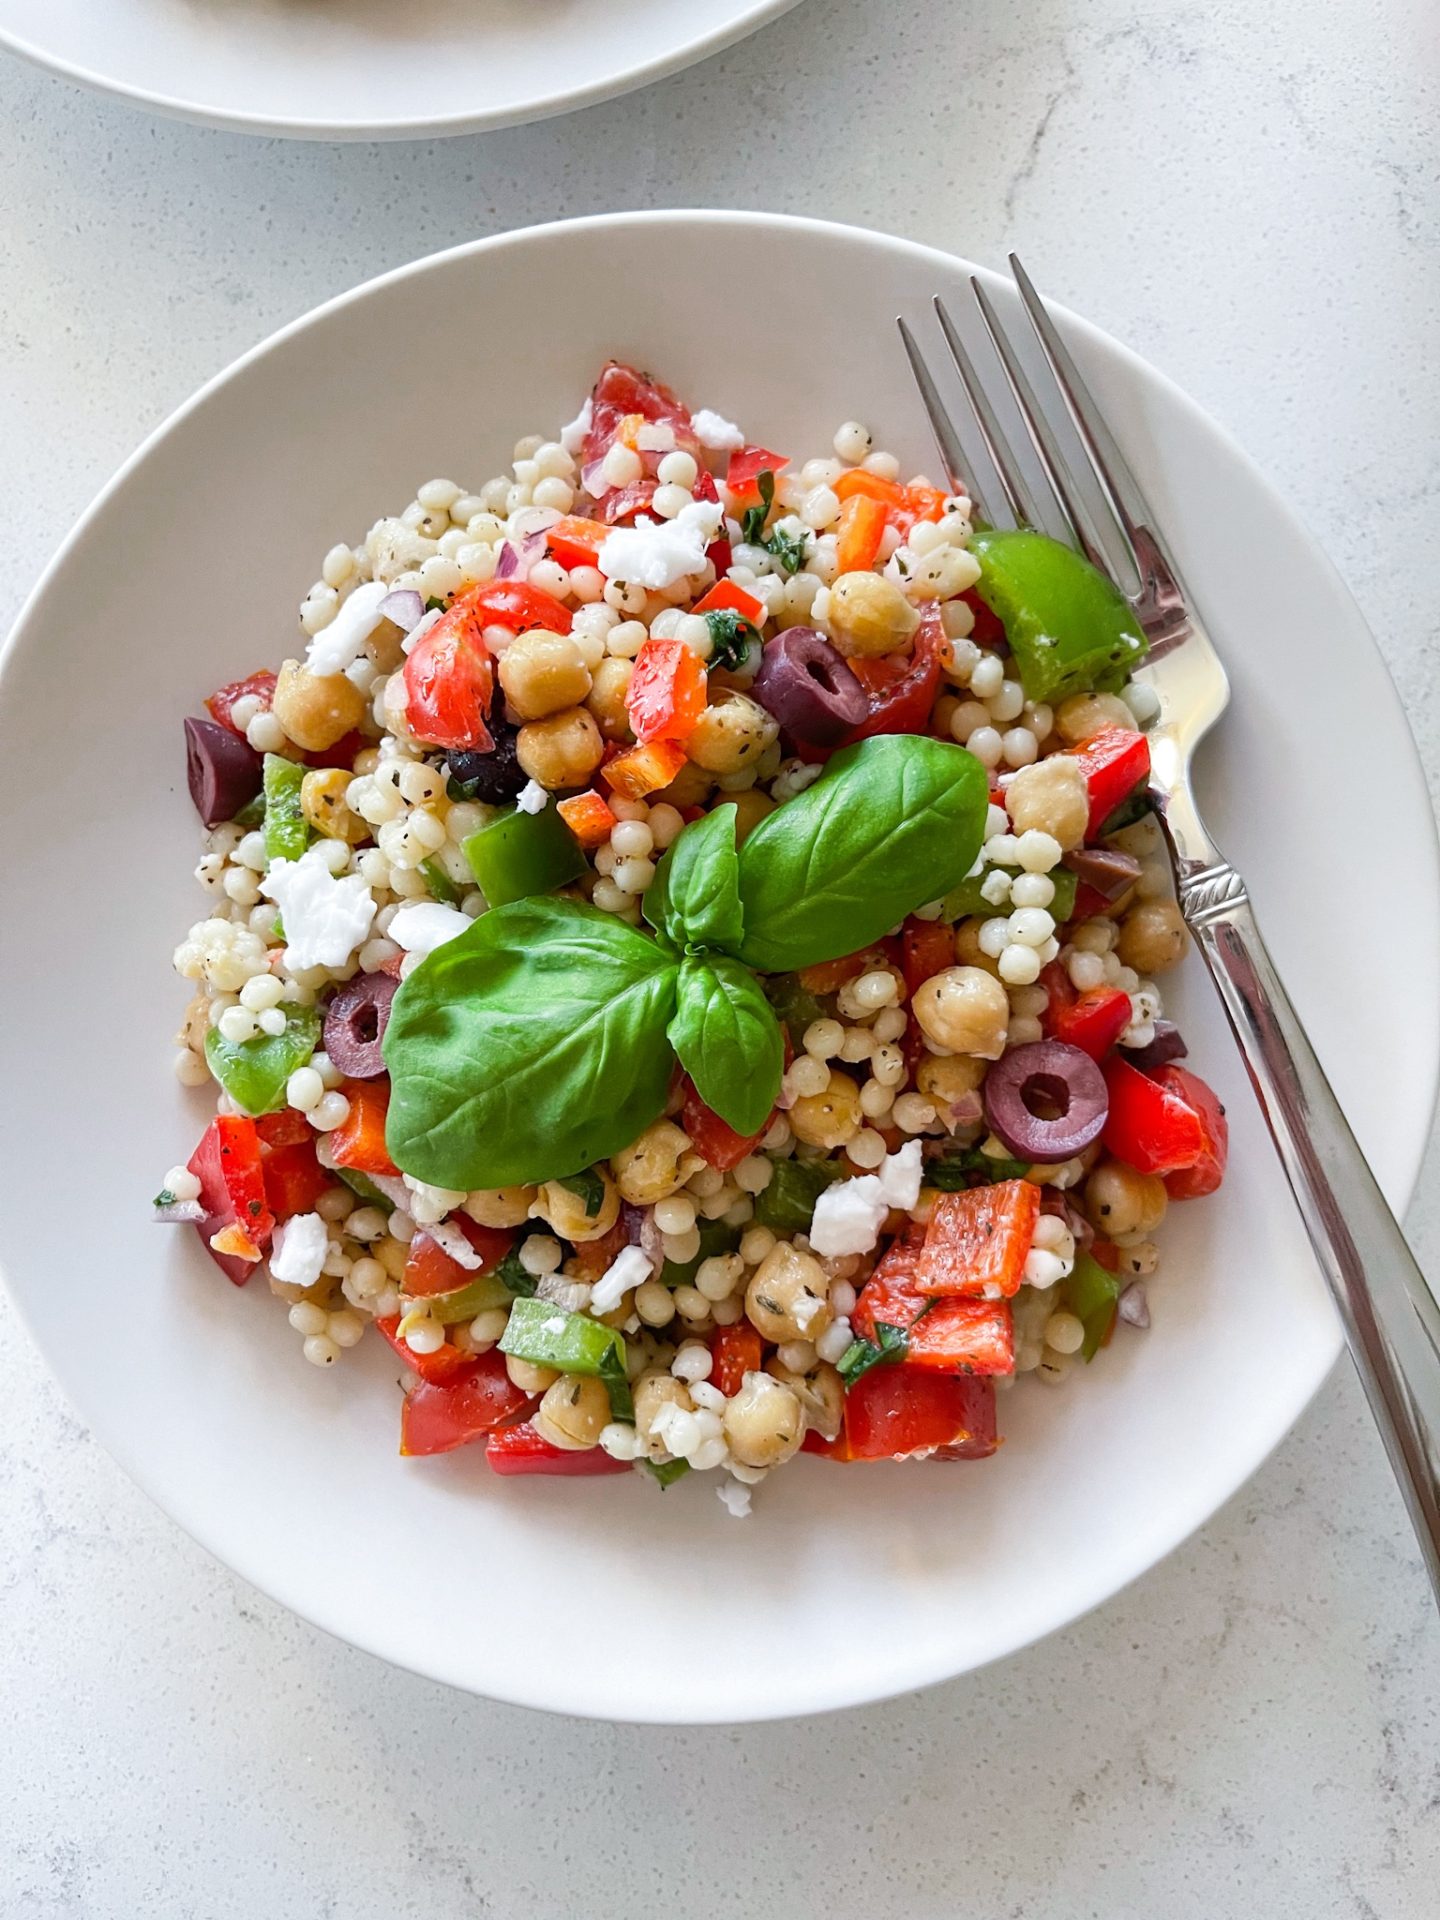 pearl couscous, bell peppers, onions, tomatoes, olives and lemon dressing